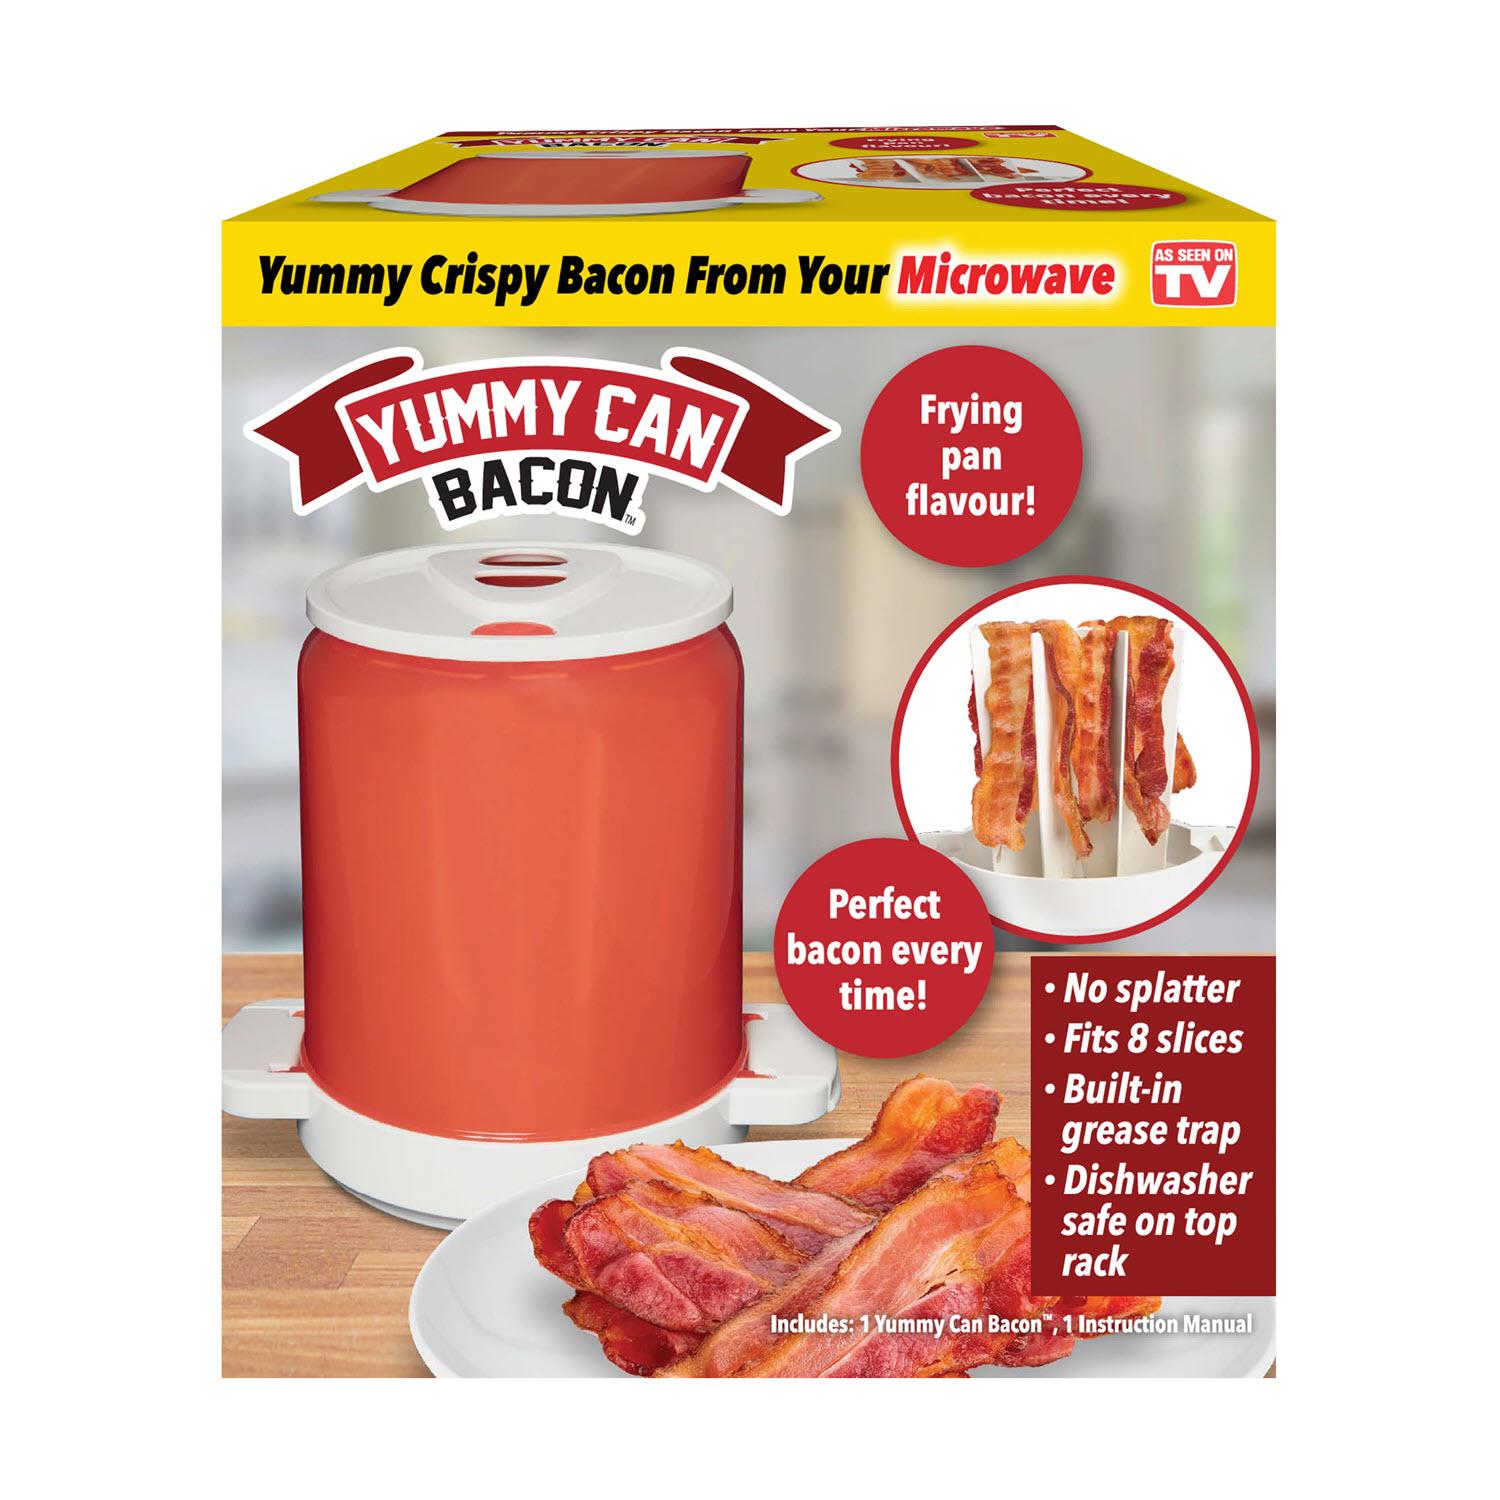 As Seen On TV Yummy Can Microwave Bacon Cooker